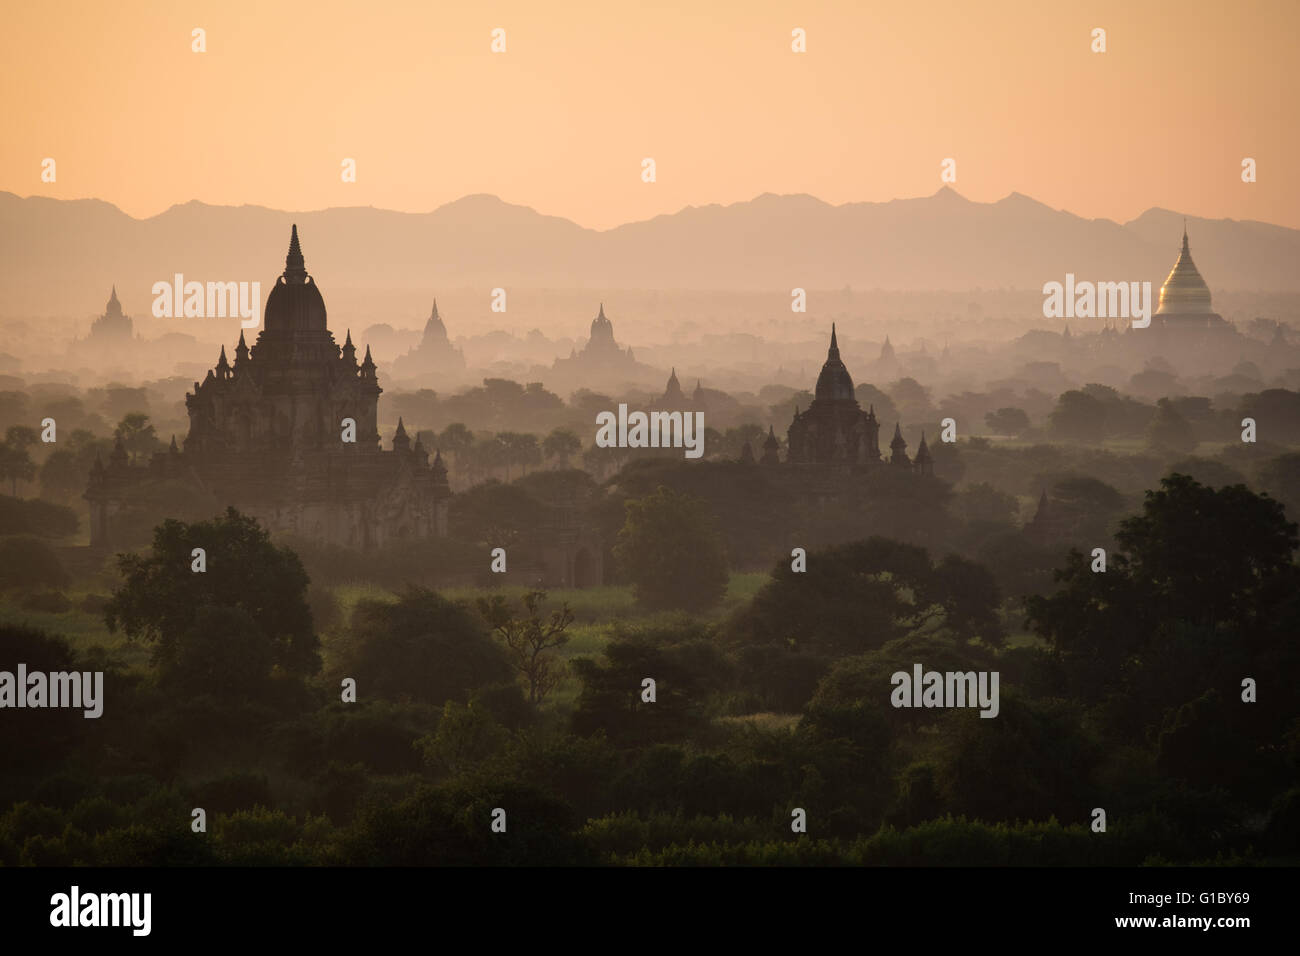 Dawn over the ancient temples in Bagan scattered through the misty landscape Stock Photo